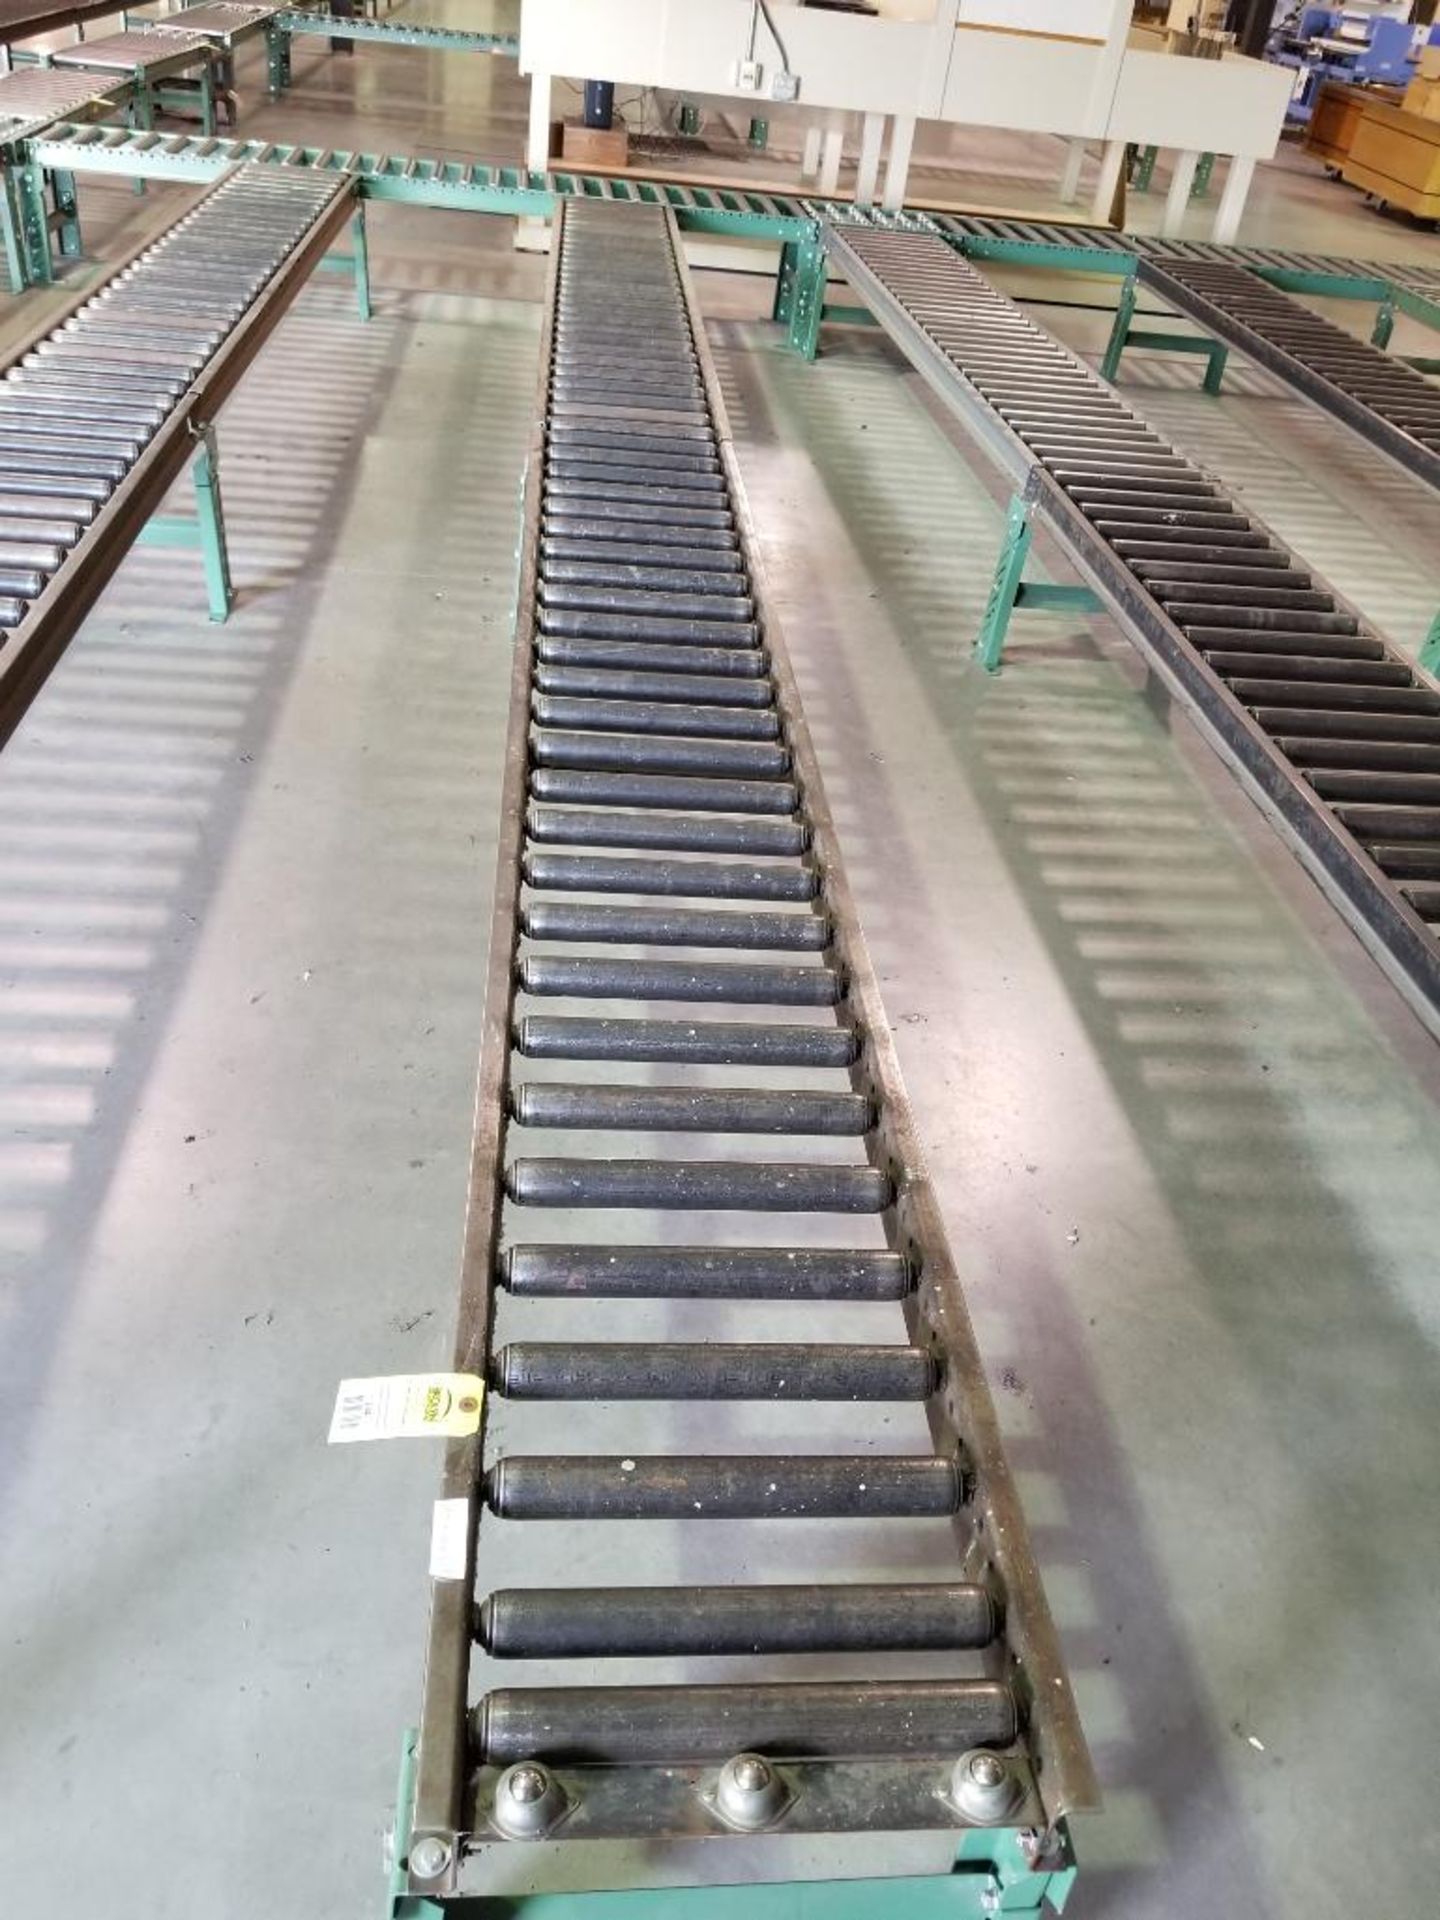 20ft roller conveyor section. 18in wide by 20in tall. (legs are adjustable to change height) - Image 2 of 2